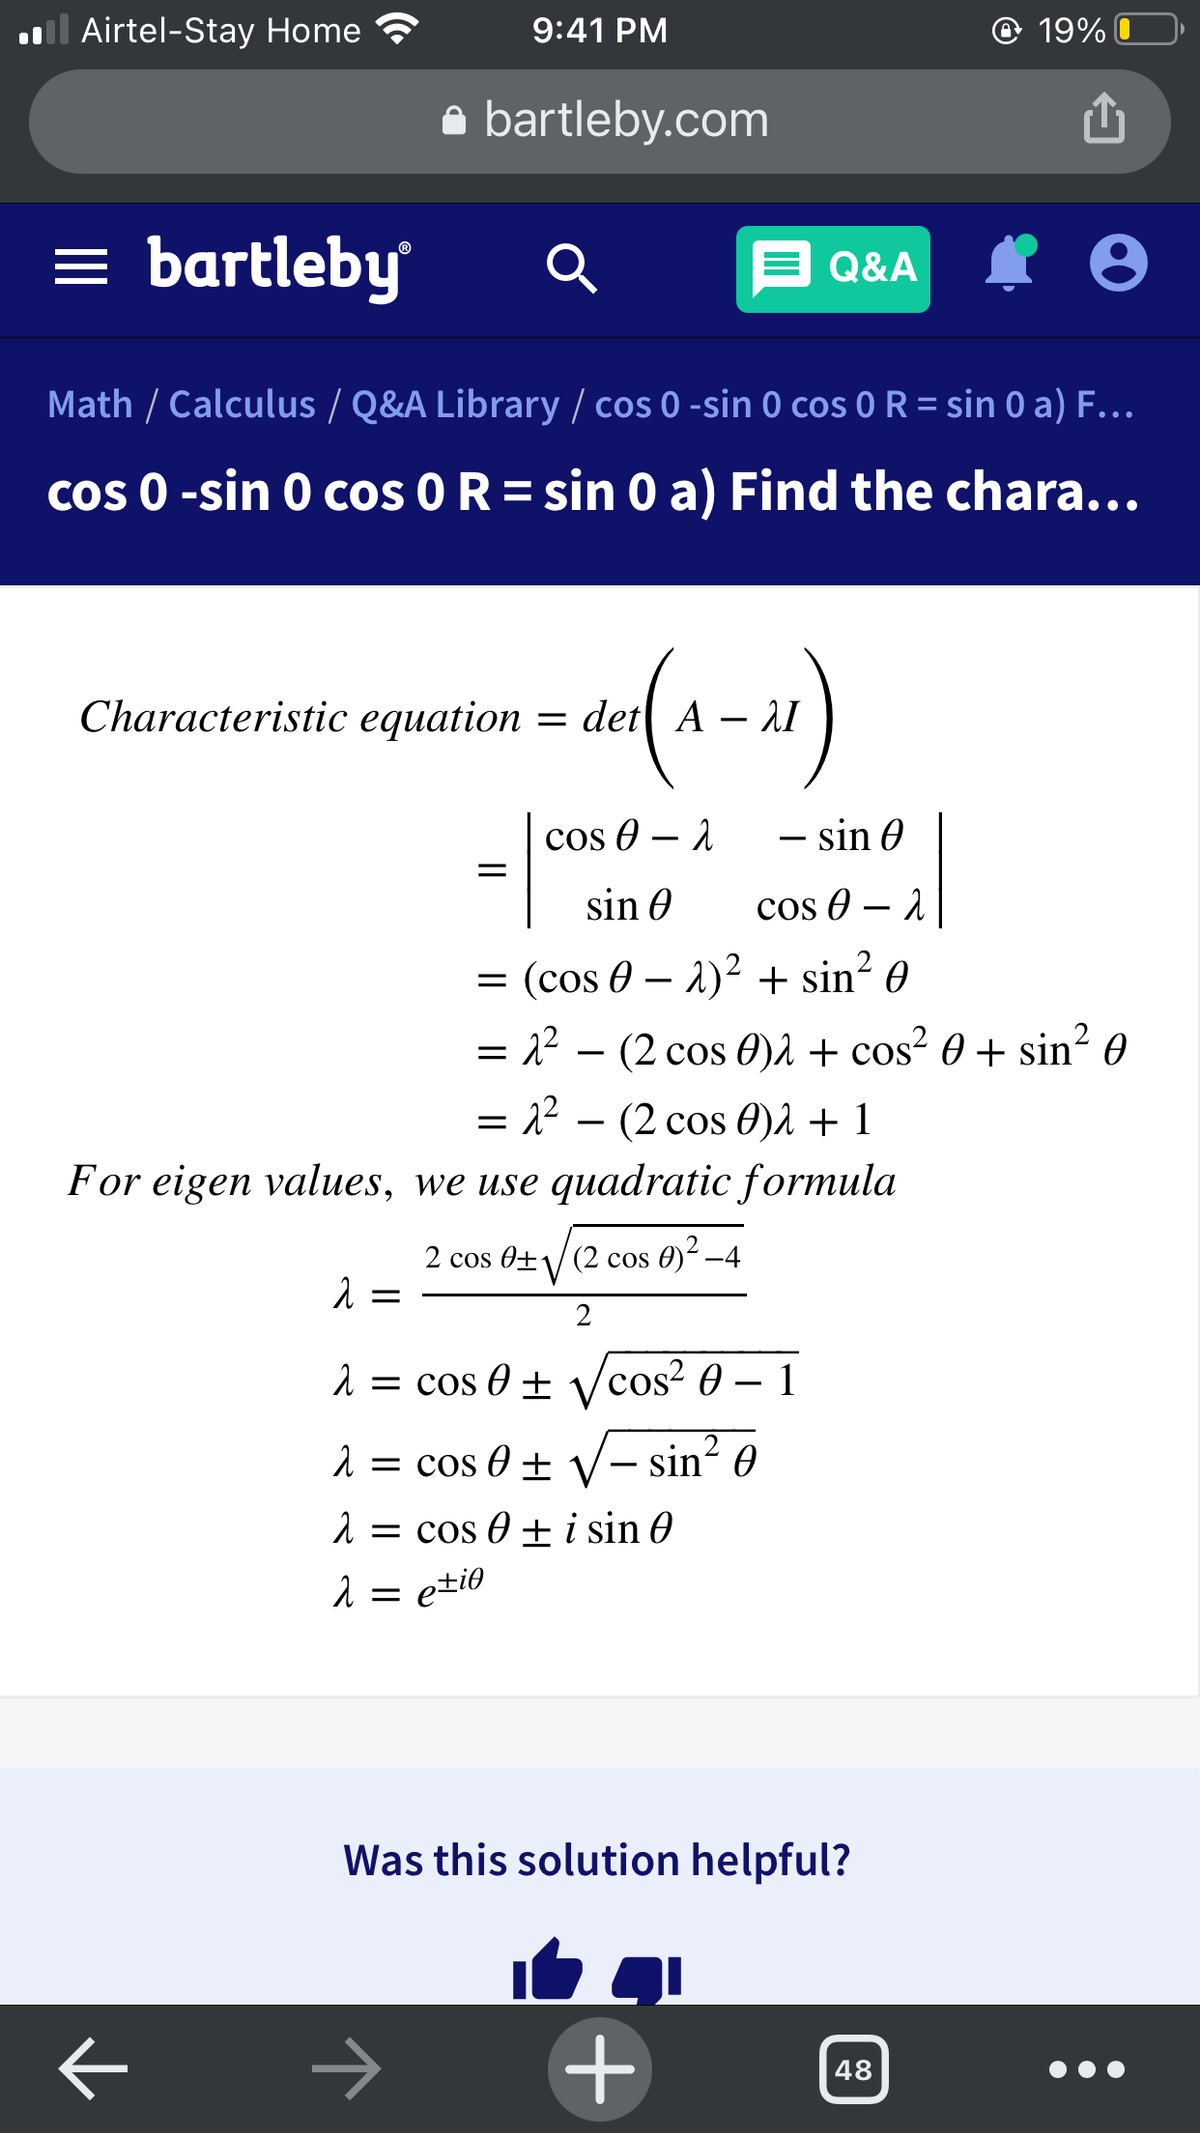 l Airtel-Stay Home
9:41 PM
@ 19% O
a bartleby.com
= bartleby
E Q&A
Math / Calculus / Q&A Library / cos 0 -sin 0 cos 0 R = sin 0 a) F...
Cos 0 -sin 0 cos O R= sin 0 a) Find the chara...
Characteristic equation = det A
– 1I
cos O – 1
– sin 0
sin 0
cos 0 – 1
= (cos 0 – 2)2 + sin? 0
= 2² – (2 cos 0)2 + cos² 0 + sin? 0
= 22 – (2 cos 0)2 + 1
For eigen values, we use quadratic formula
2 cos 0±/(2 cos 0)² –4
2 = cos 0 ± vcos? 0 – 1
2 = cos 0 ± V- sin? 0
1 = cos 0 + i sin 0
2 = e±i0
Was this solution helpful?
48
